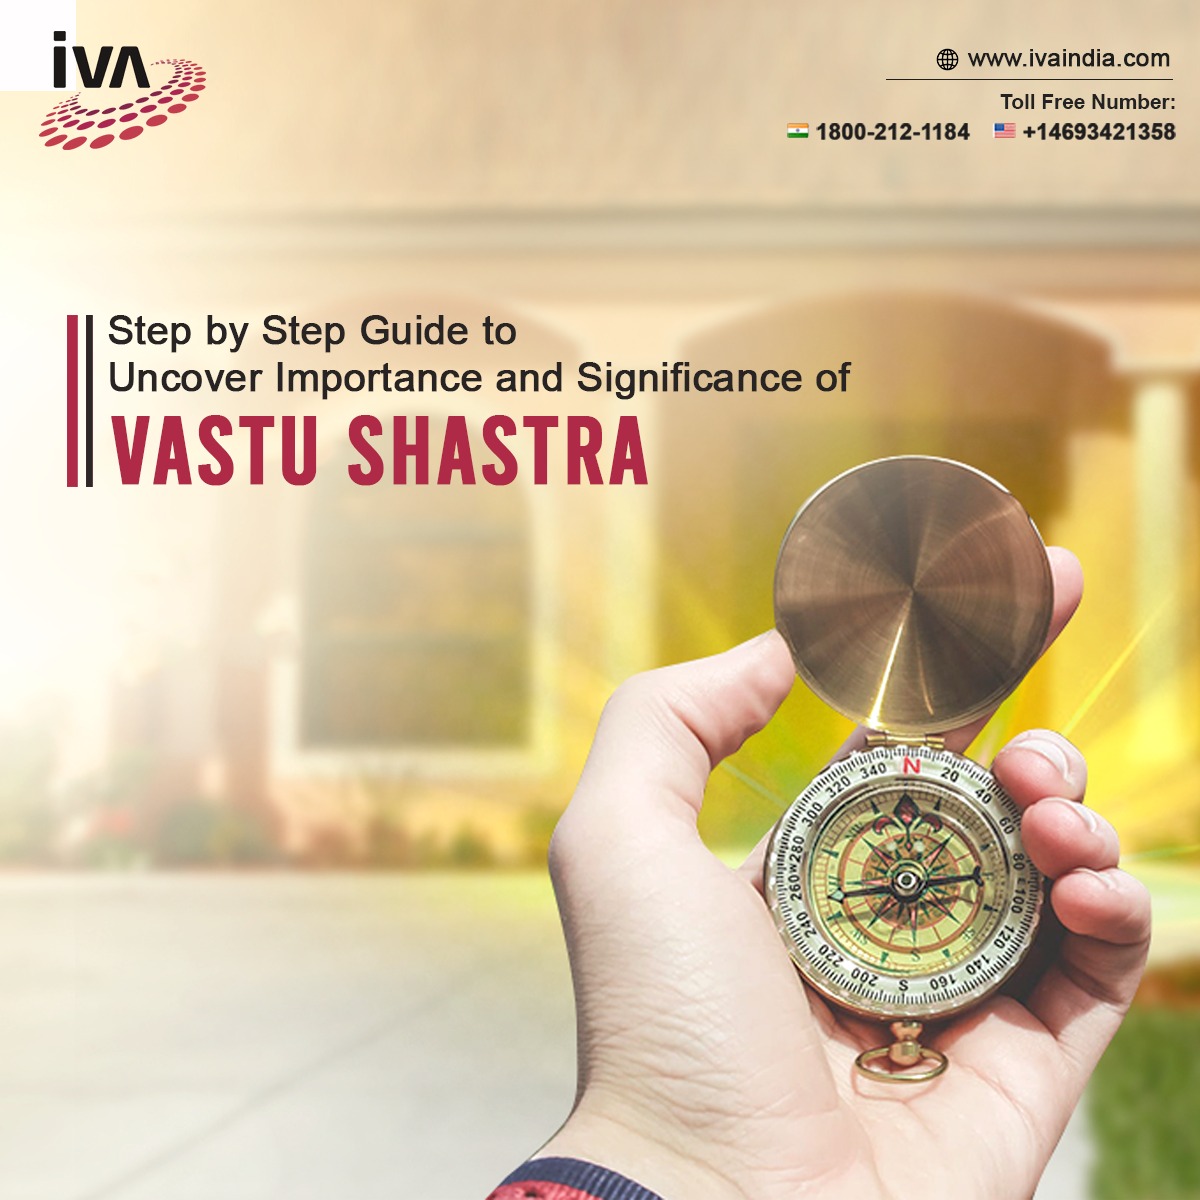 Step by Step Guide to Uncover Importance and Significance of Vastu Shastra